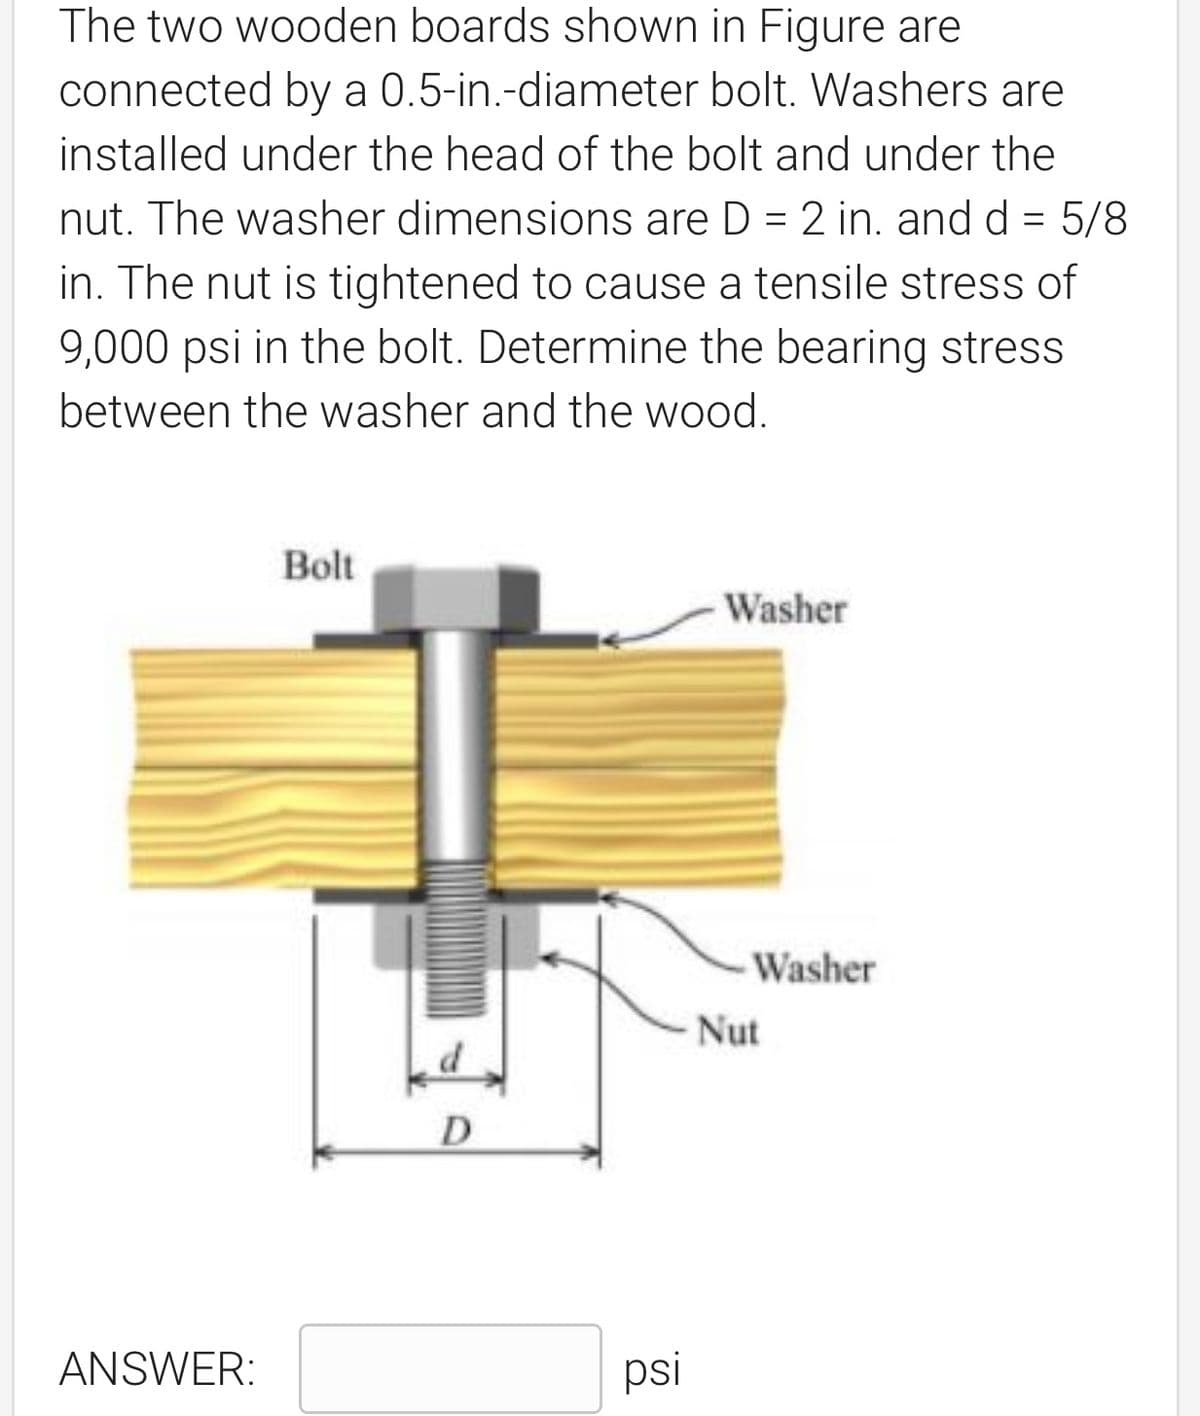 The two wooden boards shown in Figure are
connected by a 0.5-in.-diameter bolt. Washers are
installed under the head of the bolt and under the
nut. The washer dimensions are D = 2 in. and d = 5/8
in. The nut is tightened to cause a tensile stress of
9,000 psi in the bolt. Determine the bearing stress
between the washer and the wood.
Bolt
Washer
ANSWER:
D
psi
Washer
Nut